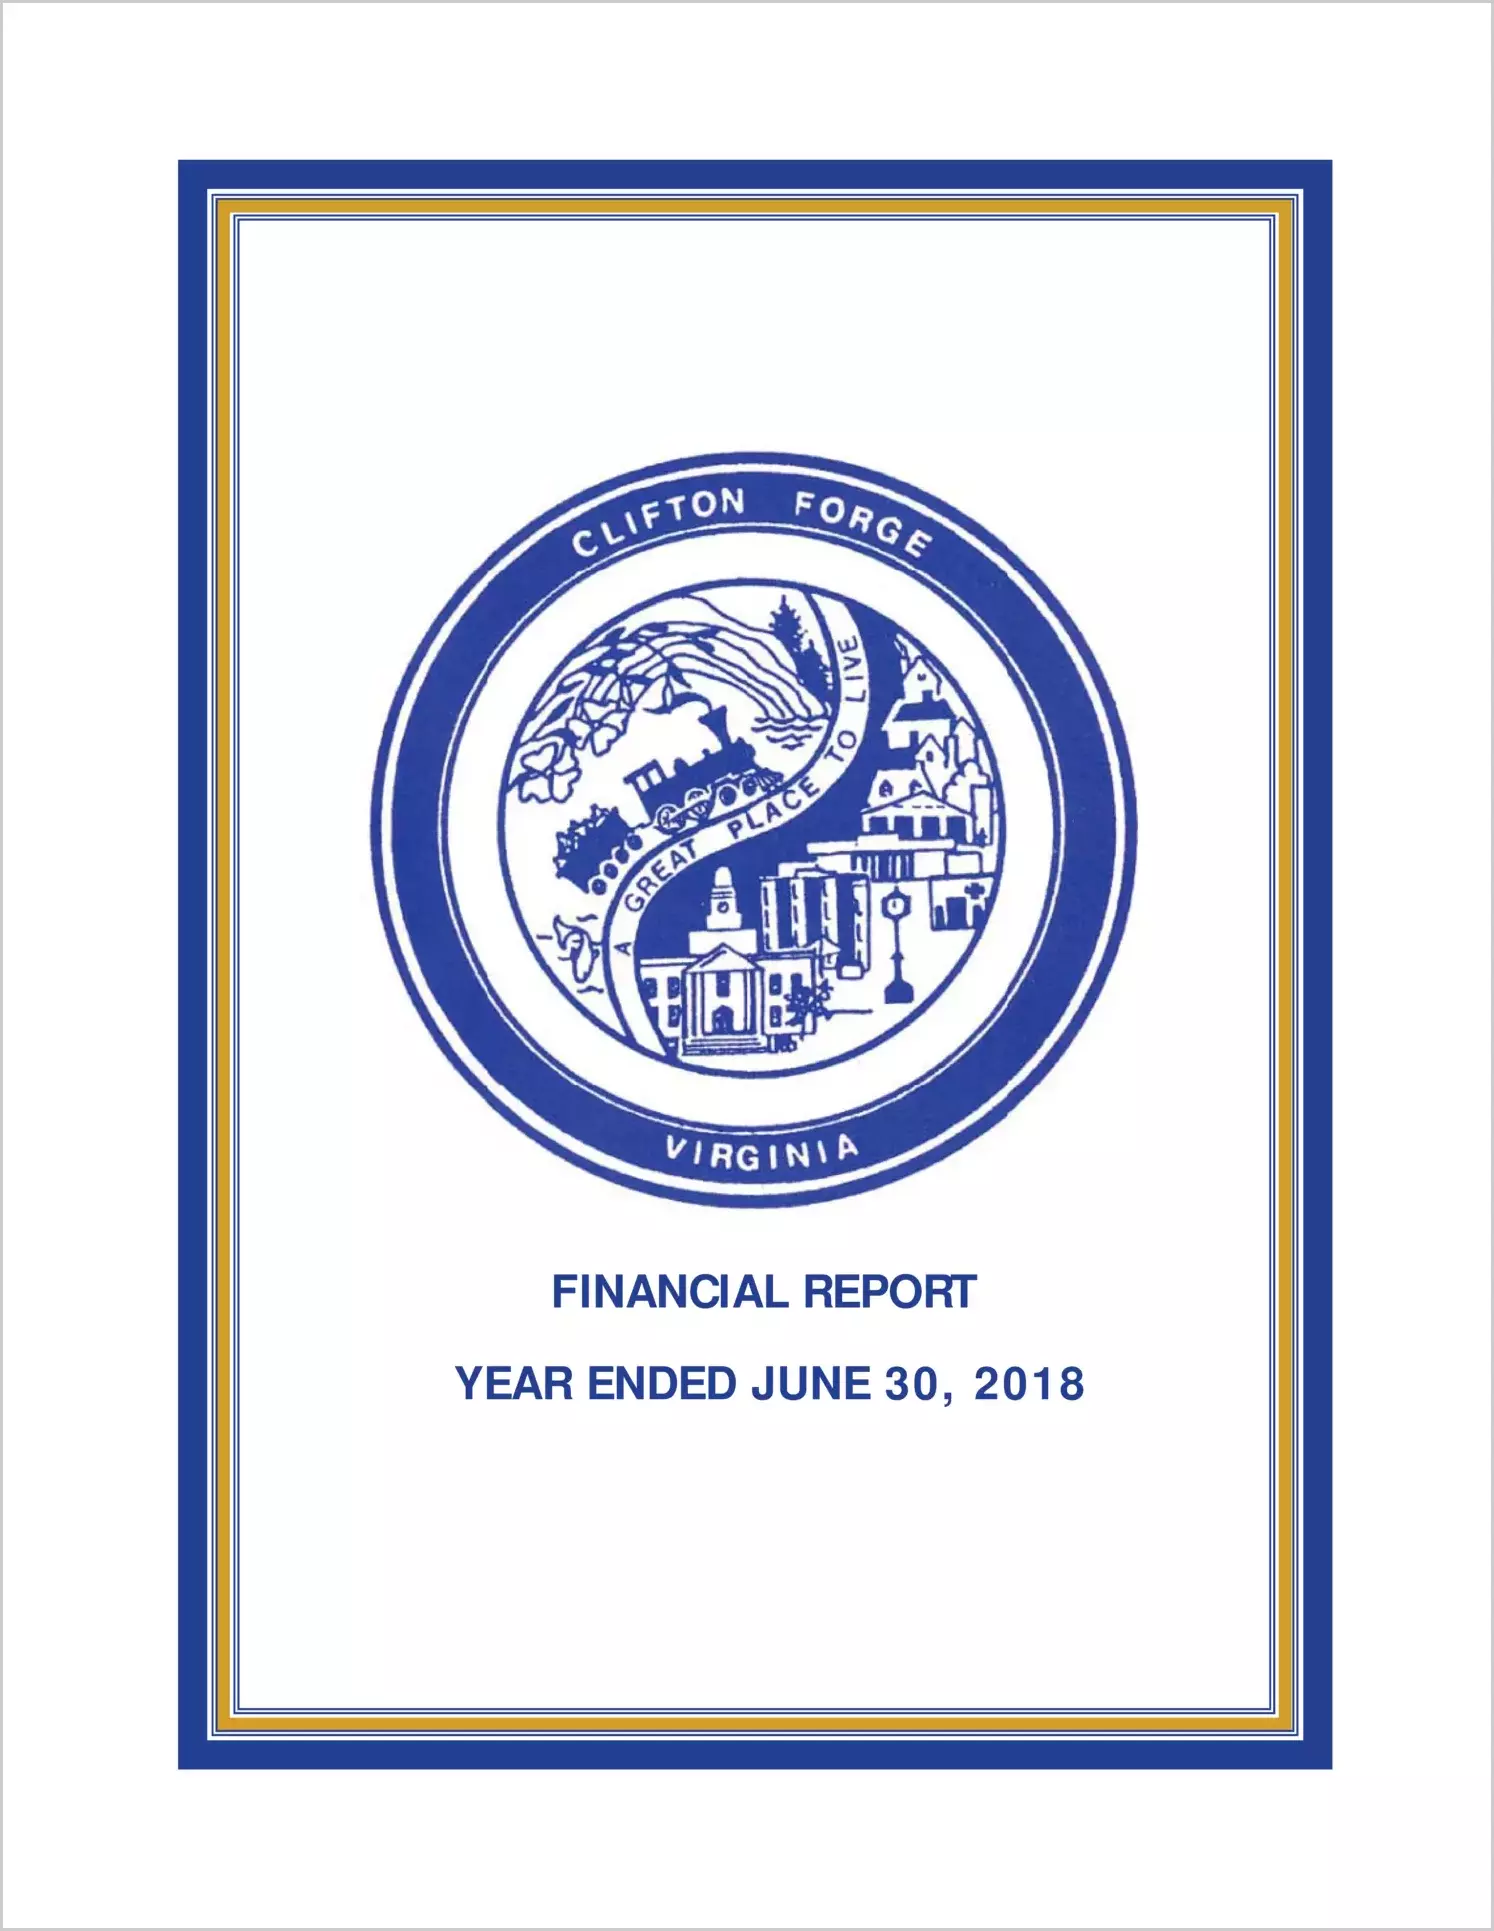 2018 Annual Financial Report for Town of Clifton Forge